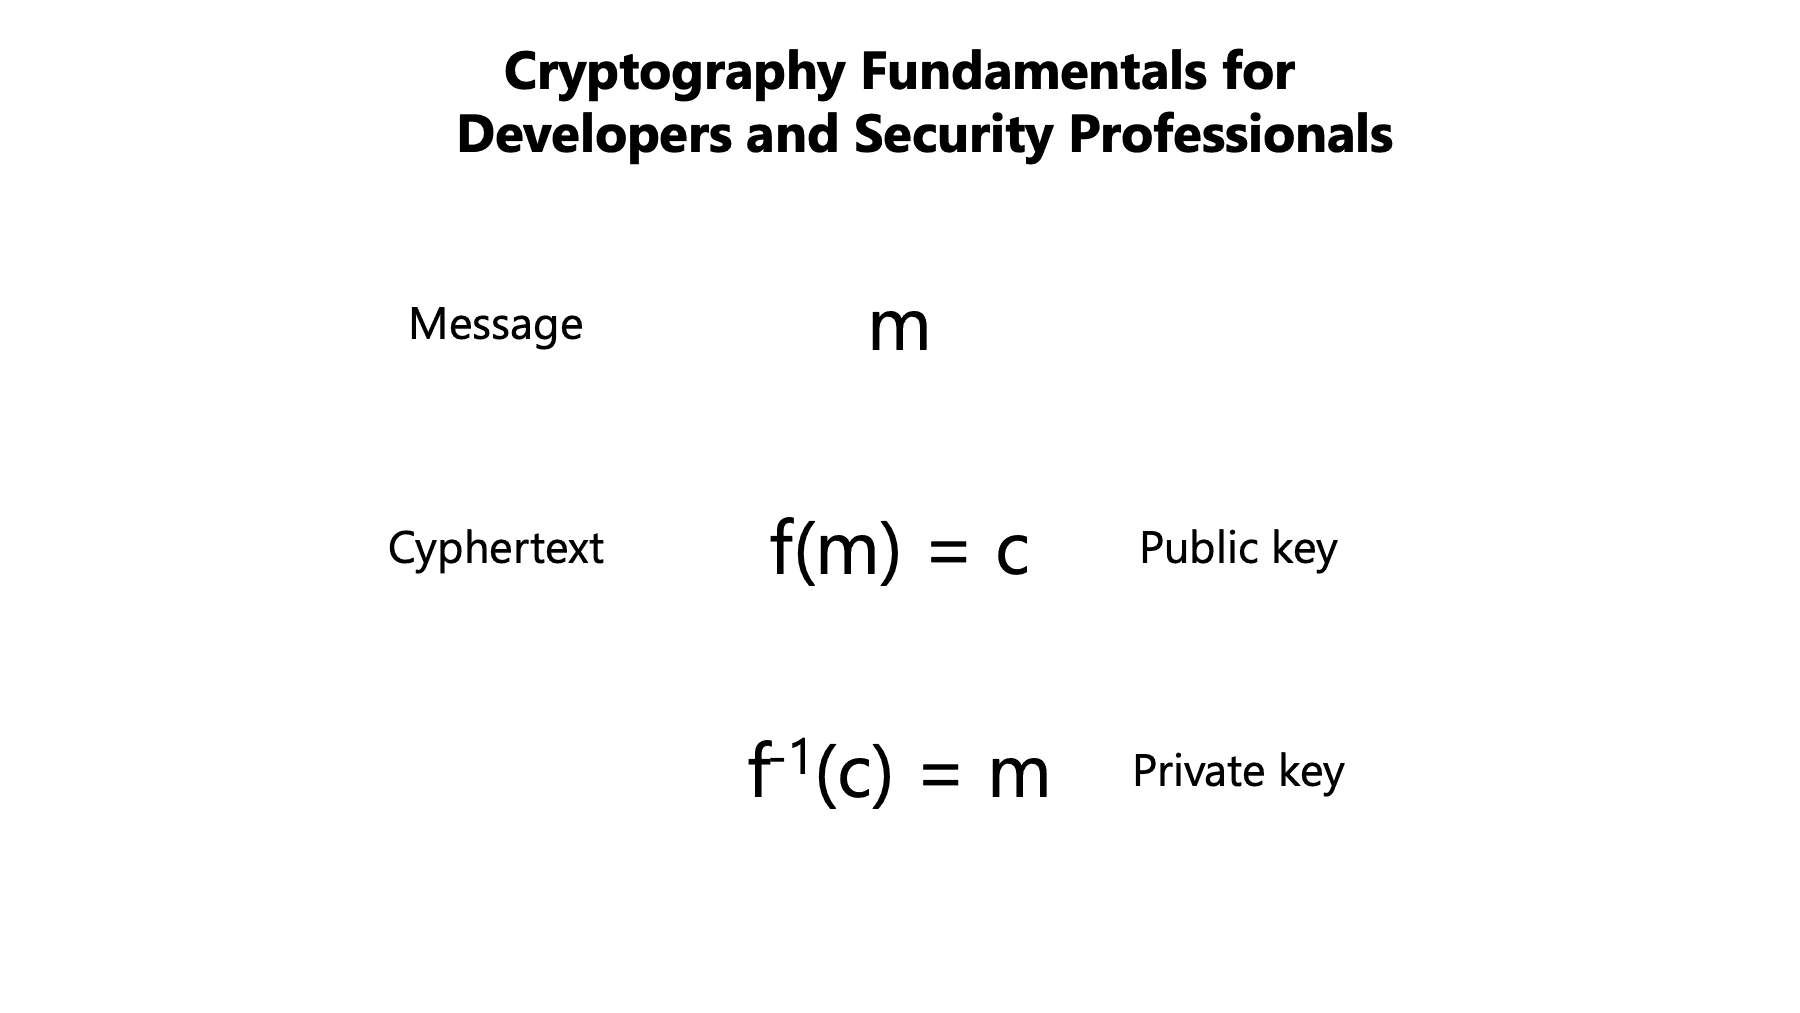 Cryptography Fundamentals for Developers and Security Professionals